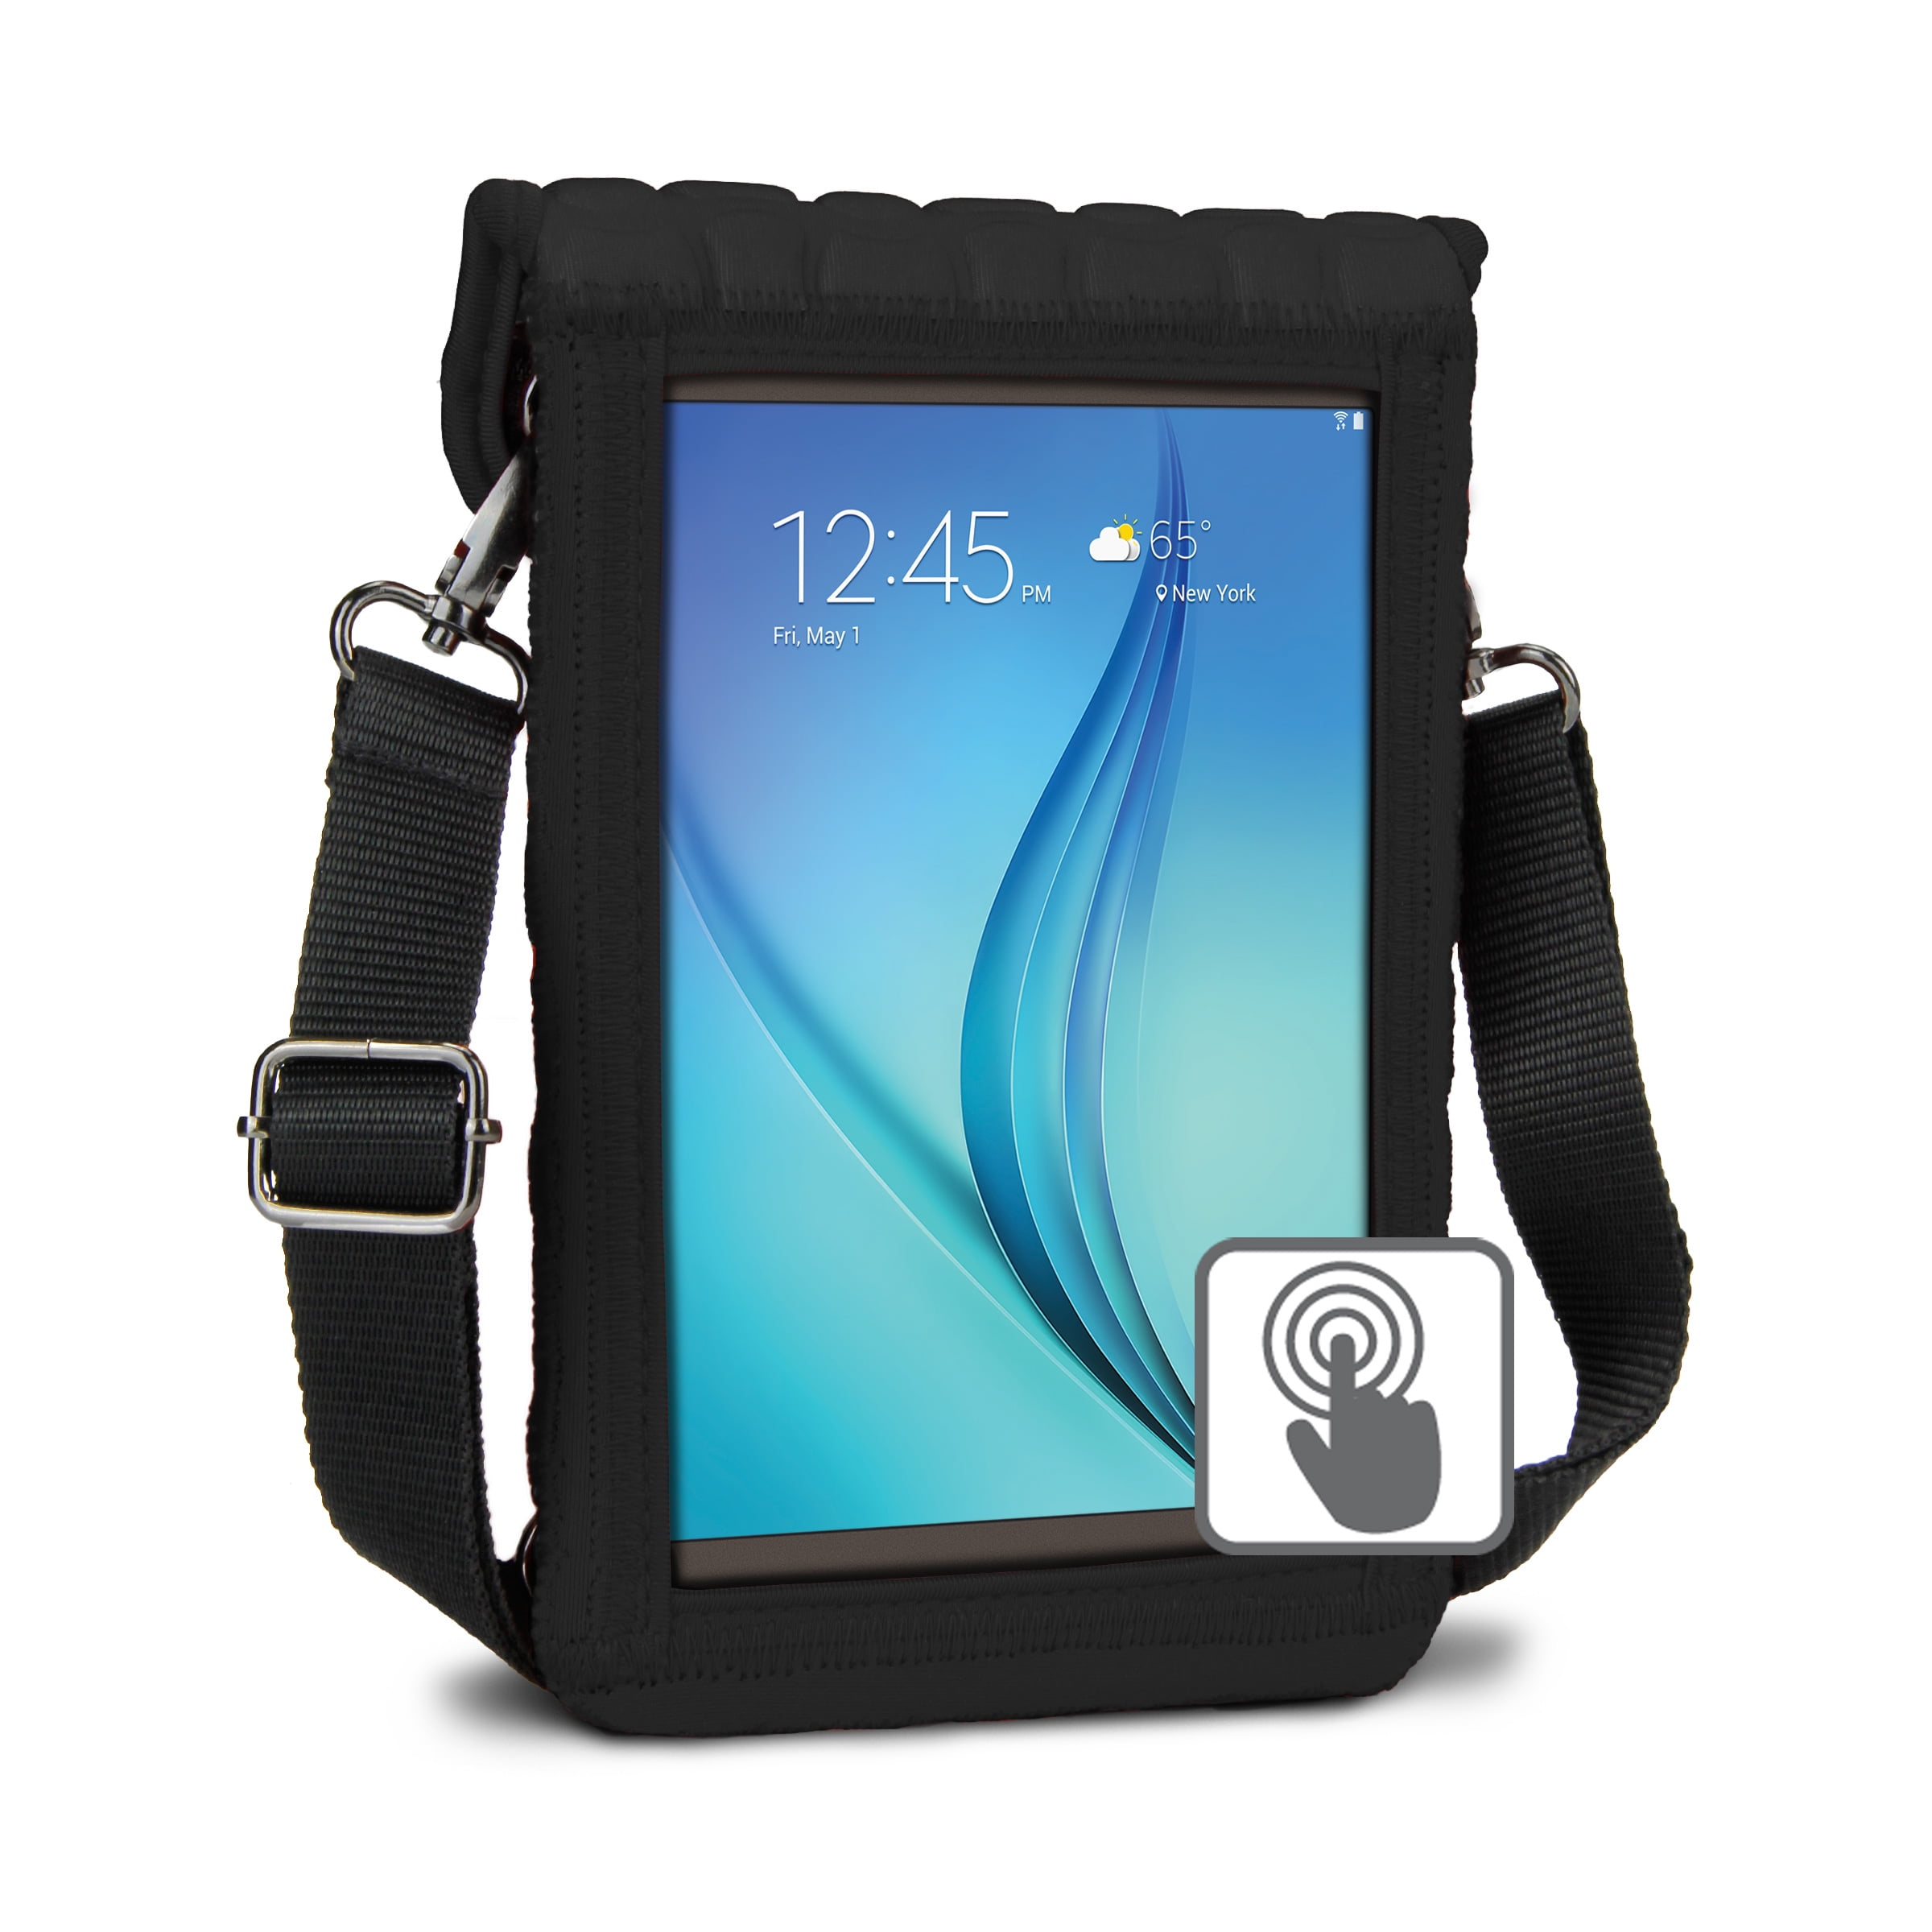 USA GEAR inch Tablet Carrying Case with Built-In Screen Protector - 7 to 8 inch Tablet Sleeve Carry Bag Compatible Samsung Galaxy Tab 8" Tab E Lite 7" /